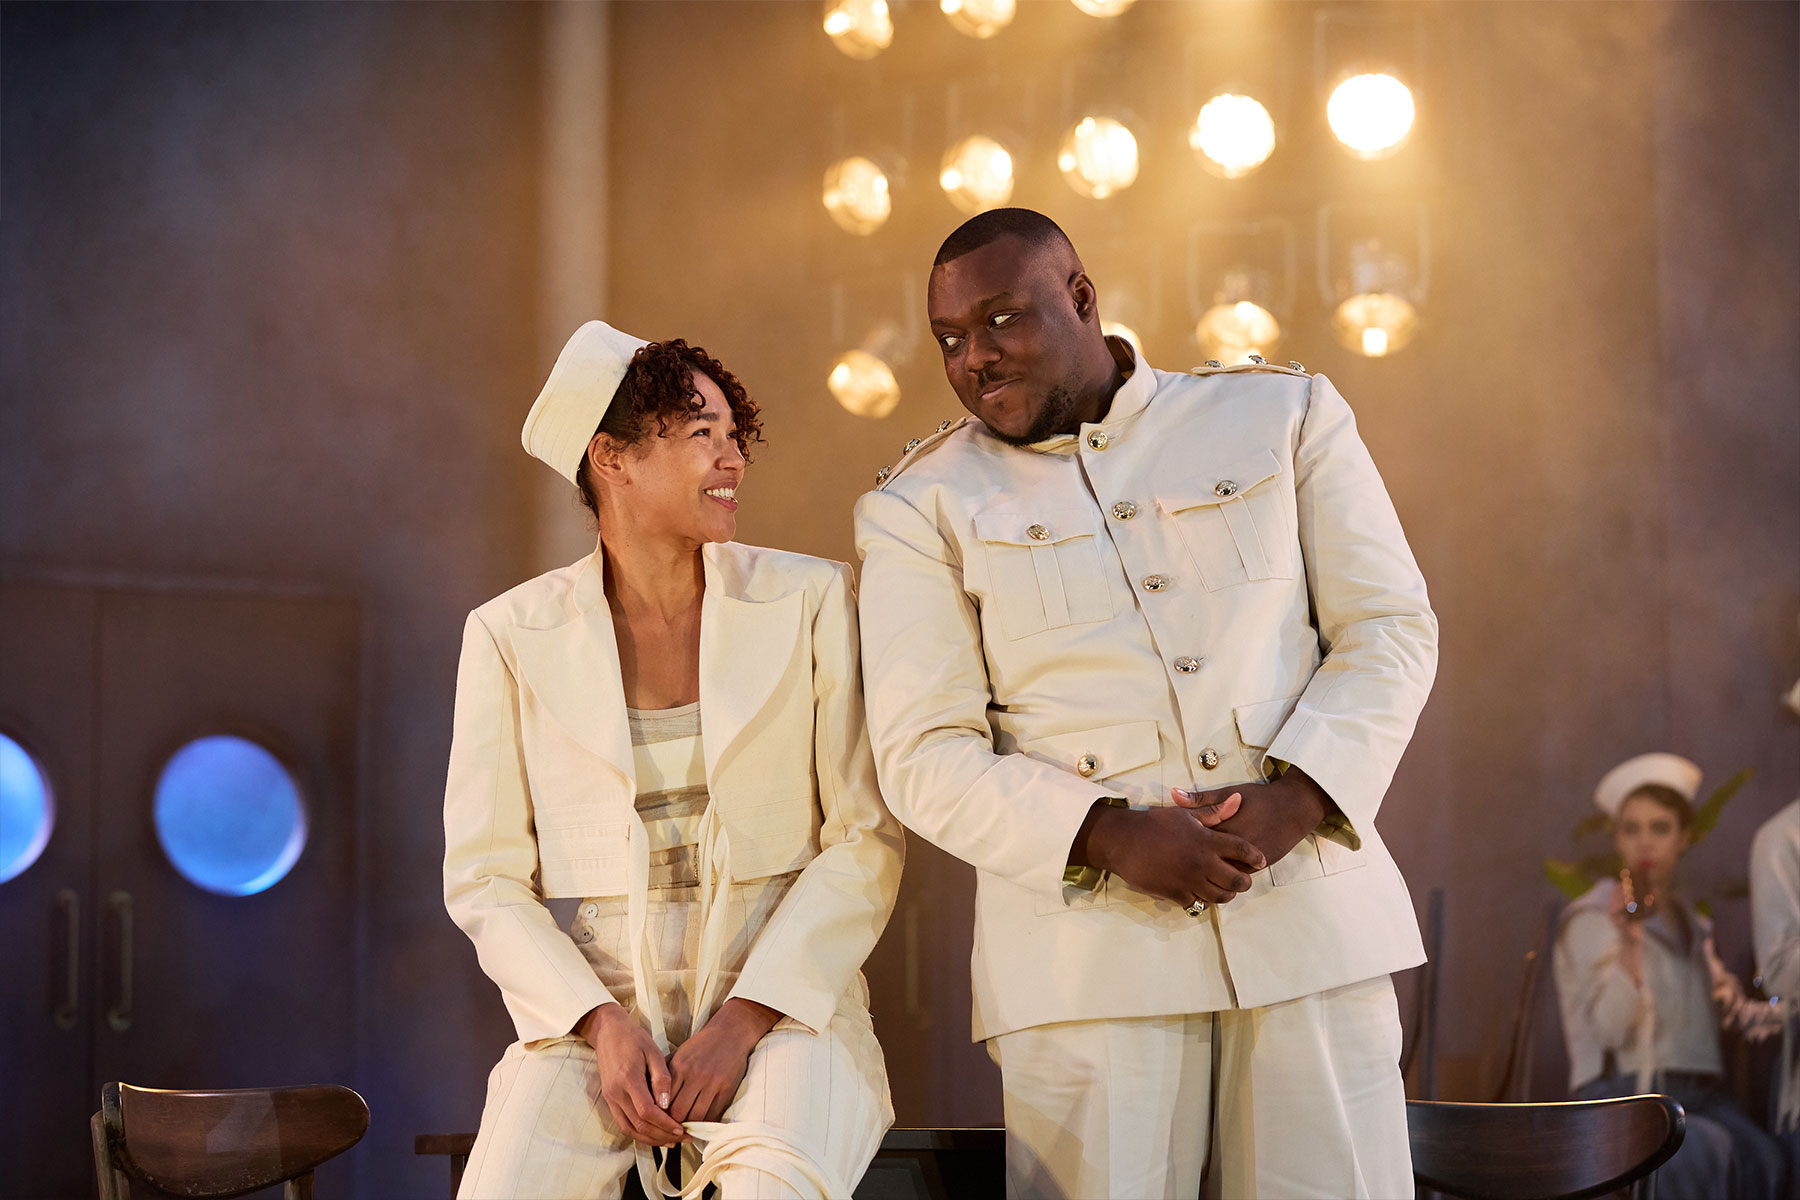 Evelyn Miller (as Viola) and Raphael Bushay (as Orsino) in a scene from Twelfth Night at Regent's Park Open Air Theatre